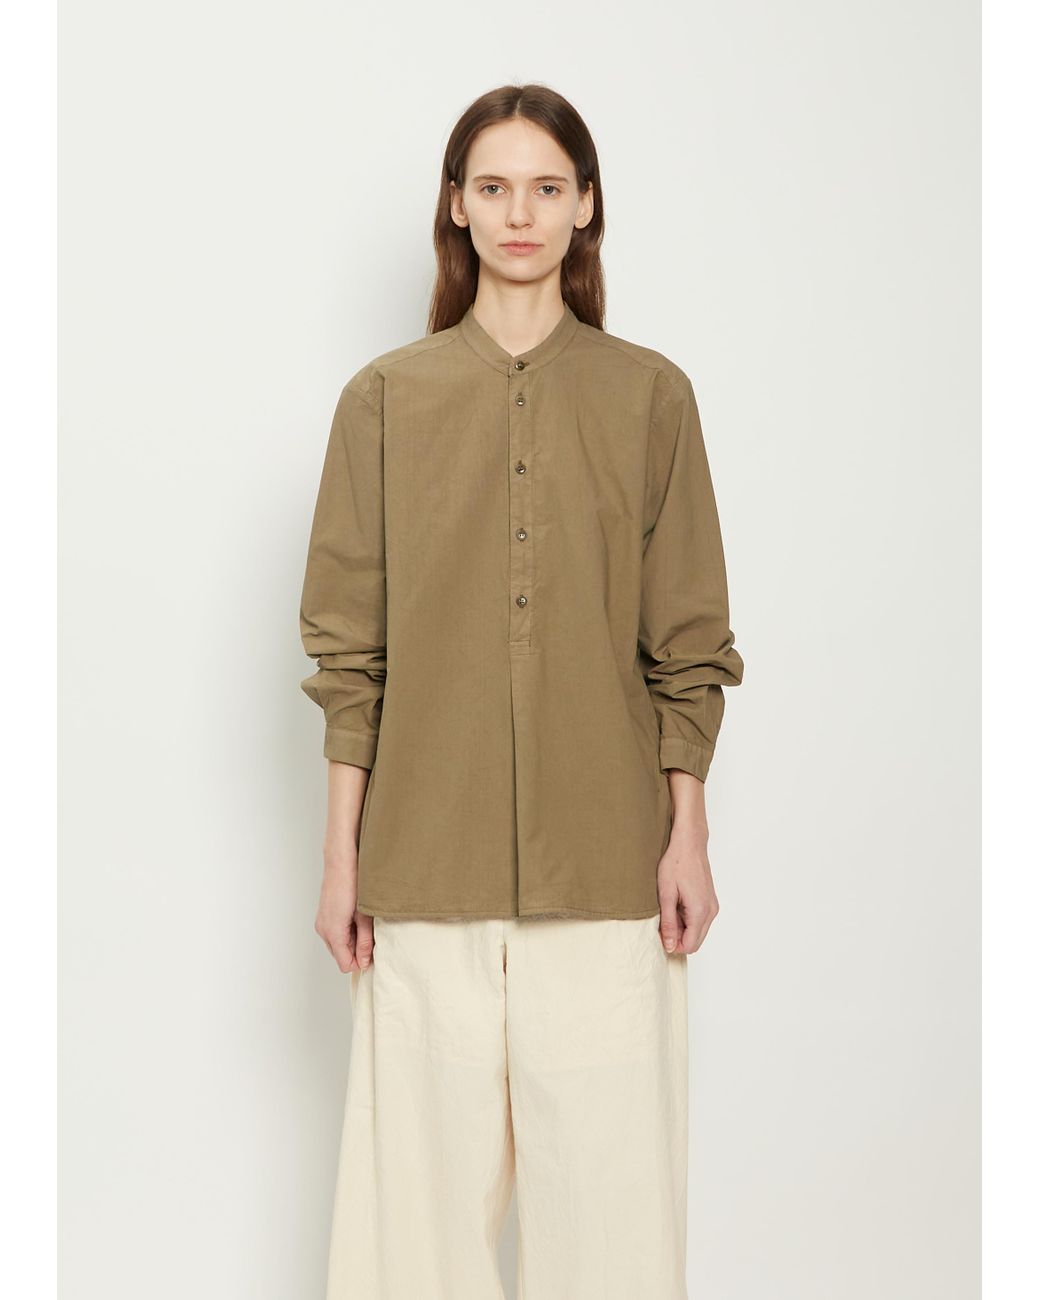 Toogood The Botanist Cotton Shirt in Natural | Lyst